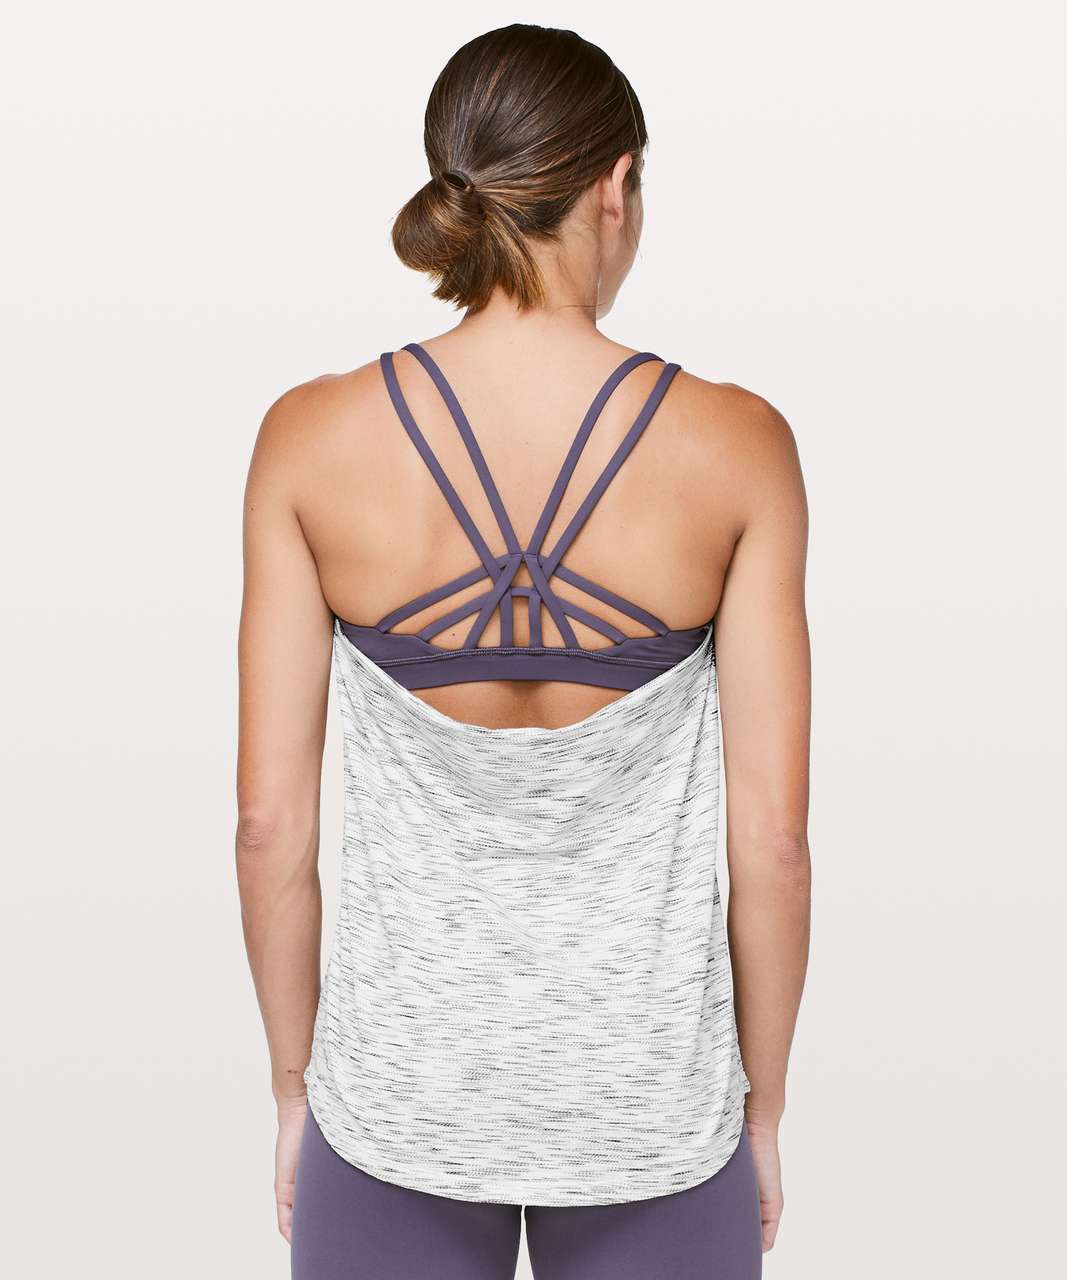 Lululemon Moment To Movement 2-In-1 Tank - Tiger Space Dye Black White / Moonphase